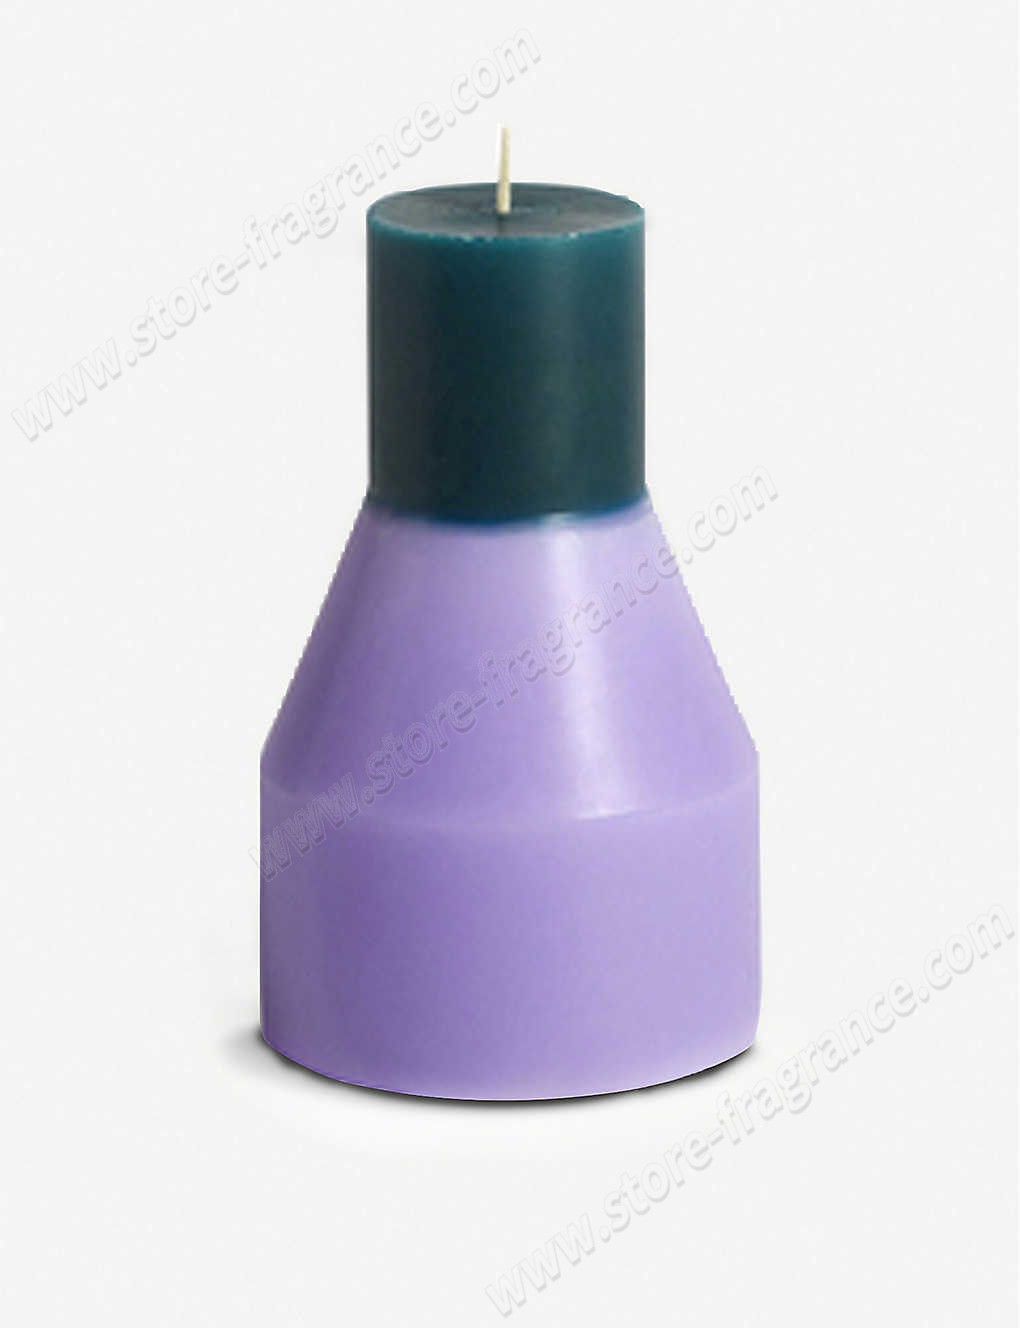 HAY/Small Pillar candle 15cm ✿ Discount Store - HAY/Small Pillar candle 15cm ✿ Discount Store